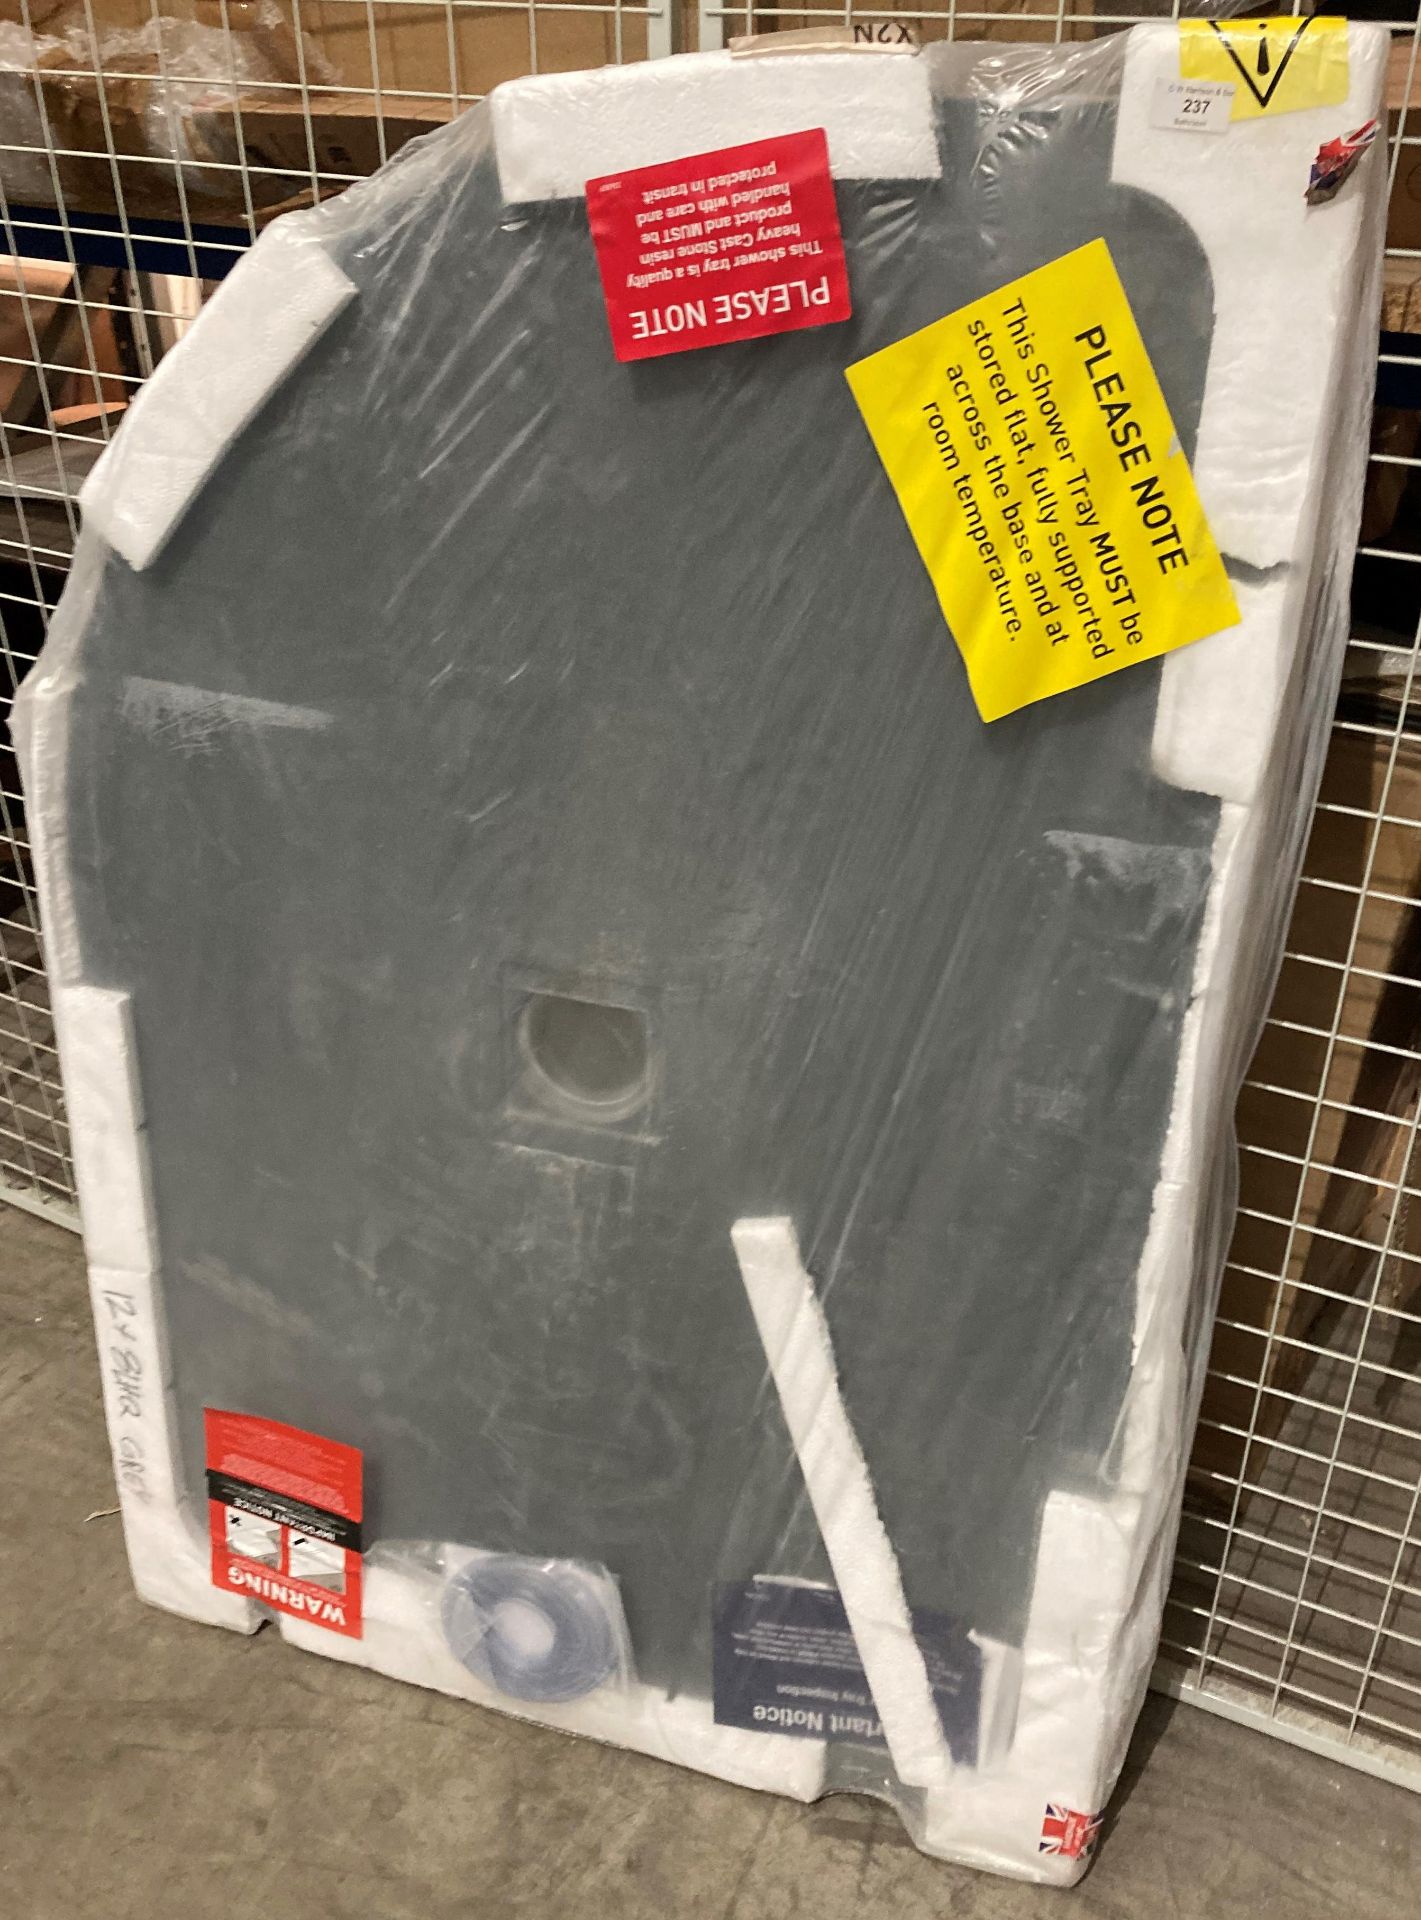 1200 x 800 Mineral shower tray in slate grey (saleroom location: RB)